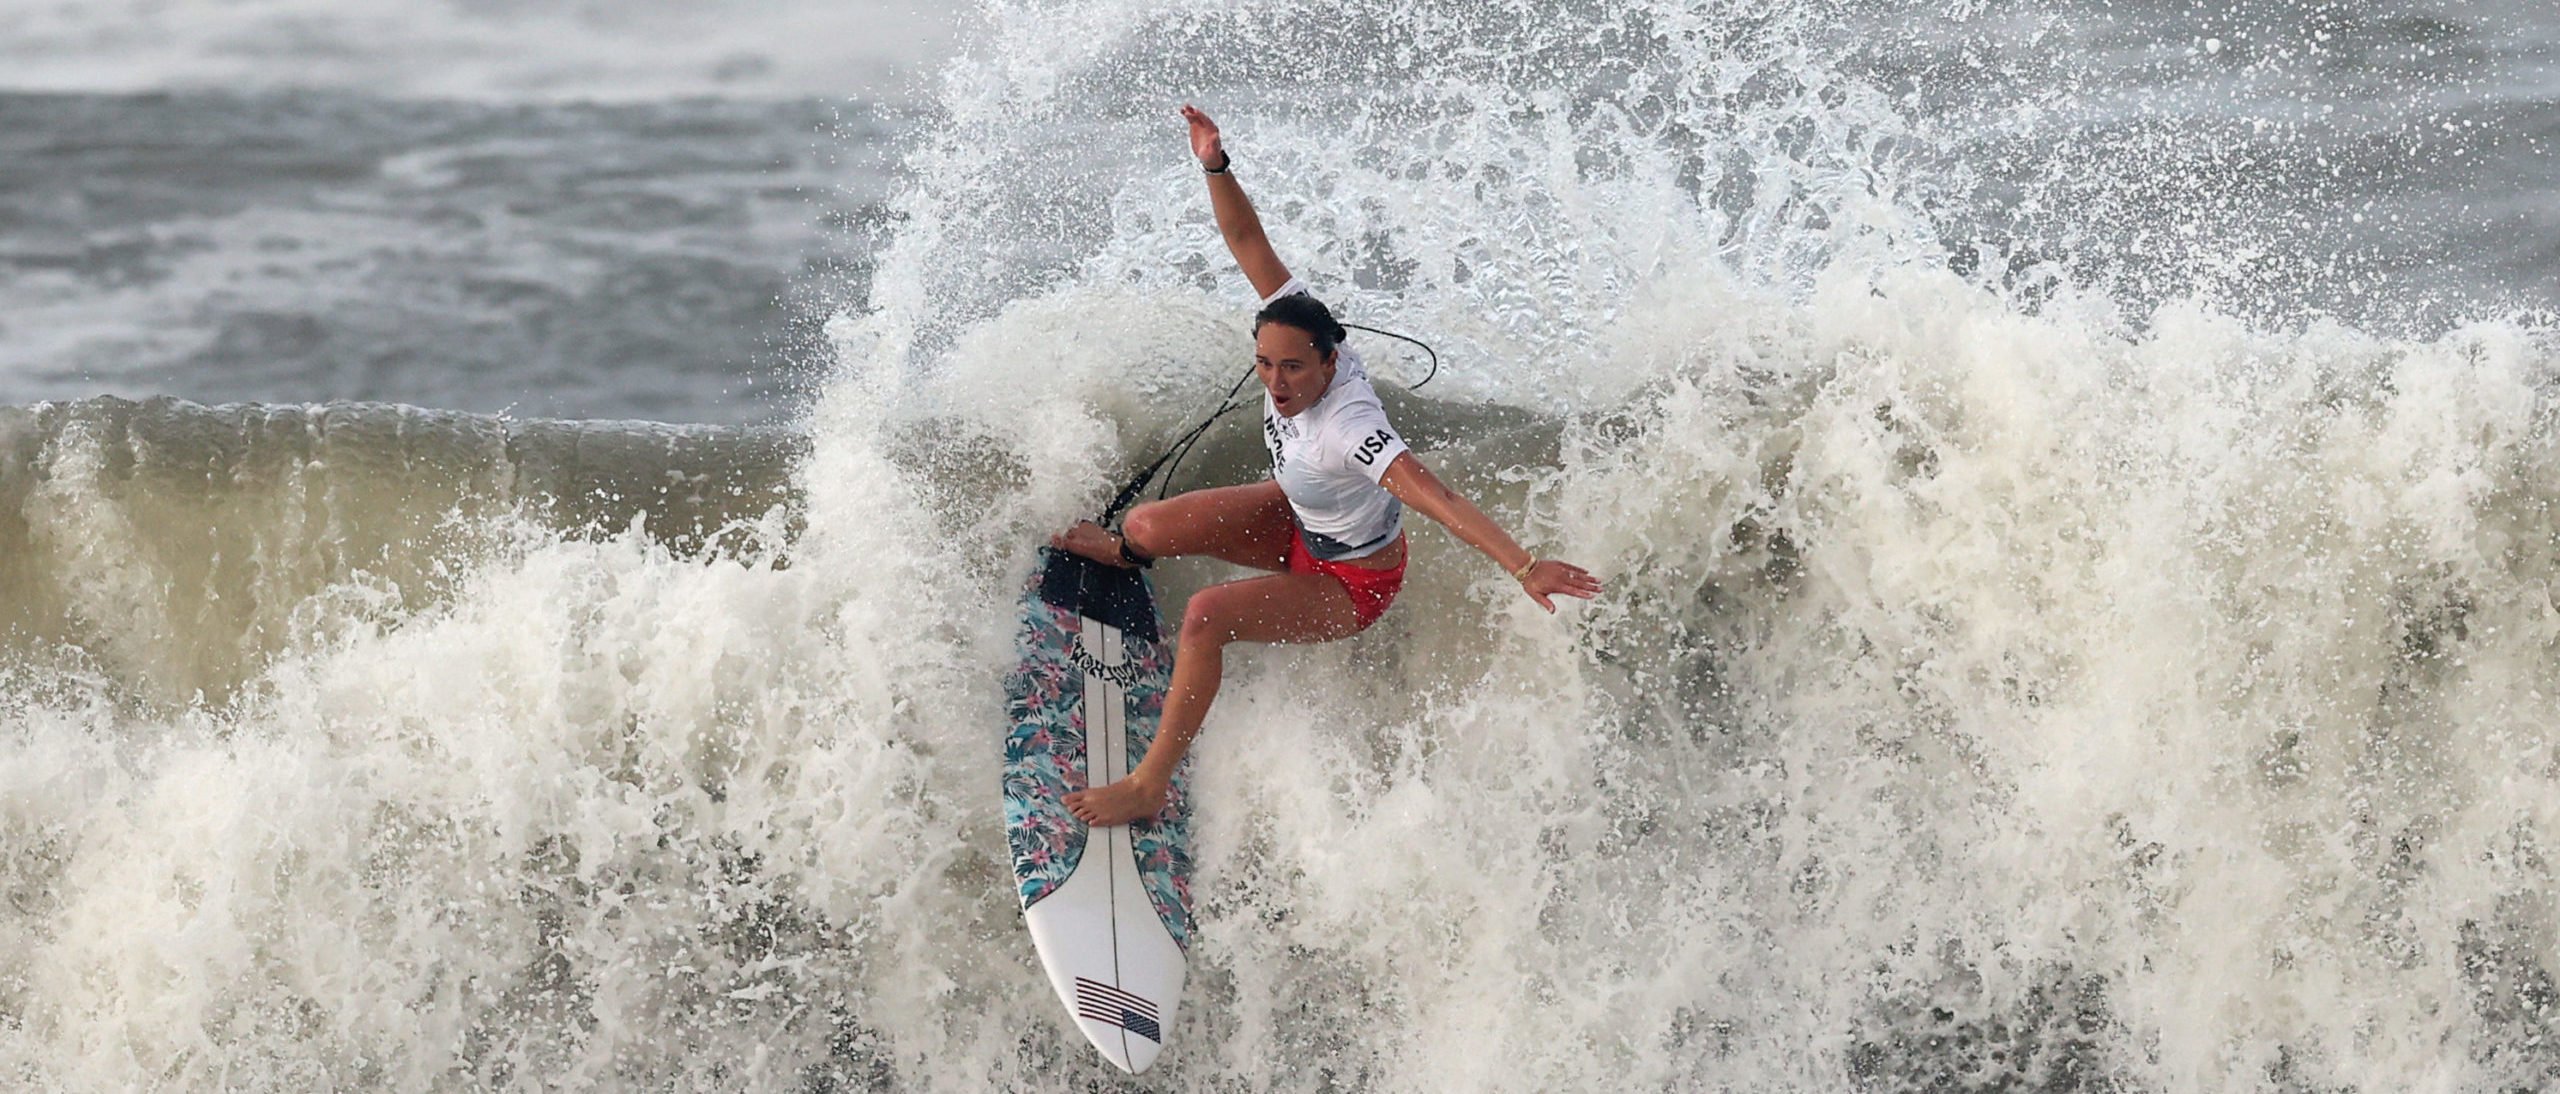 Surfers In Tokyo Olympics Get Powerful Waves From Approaching Typhoon